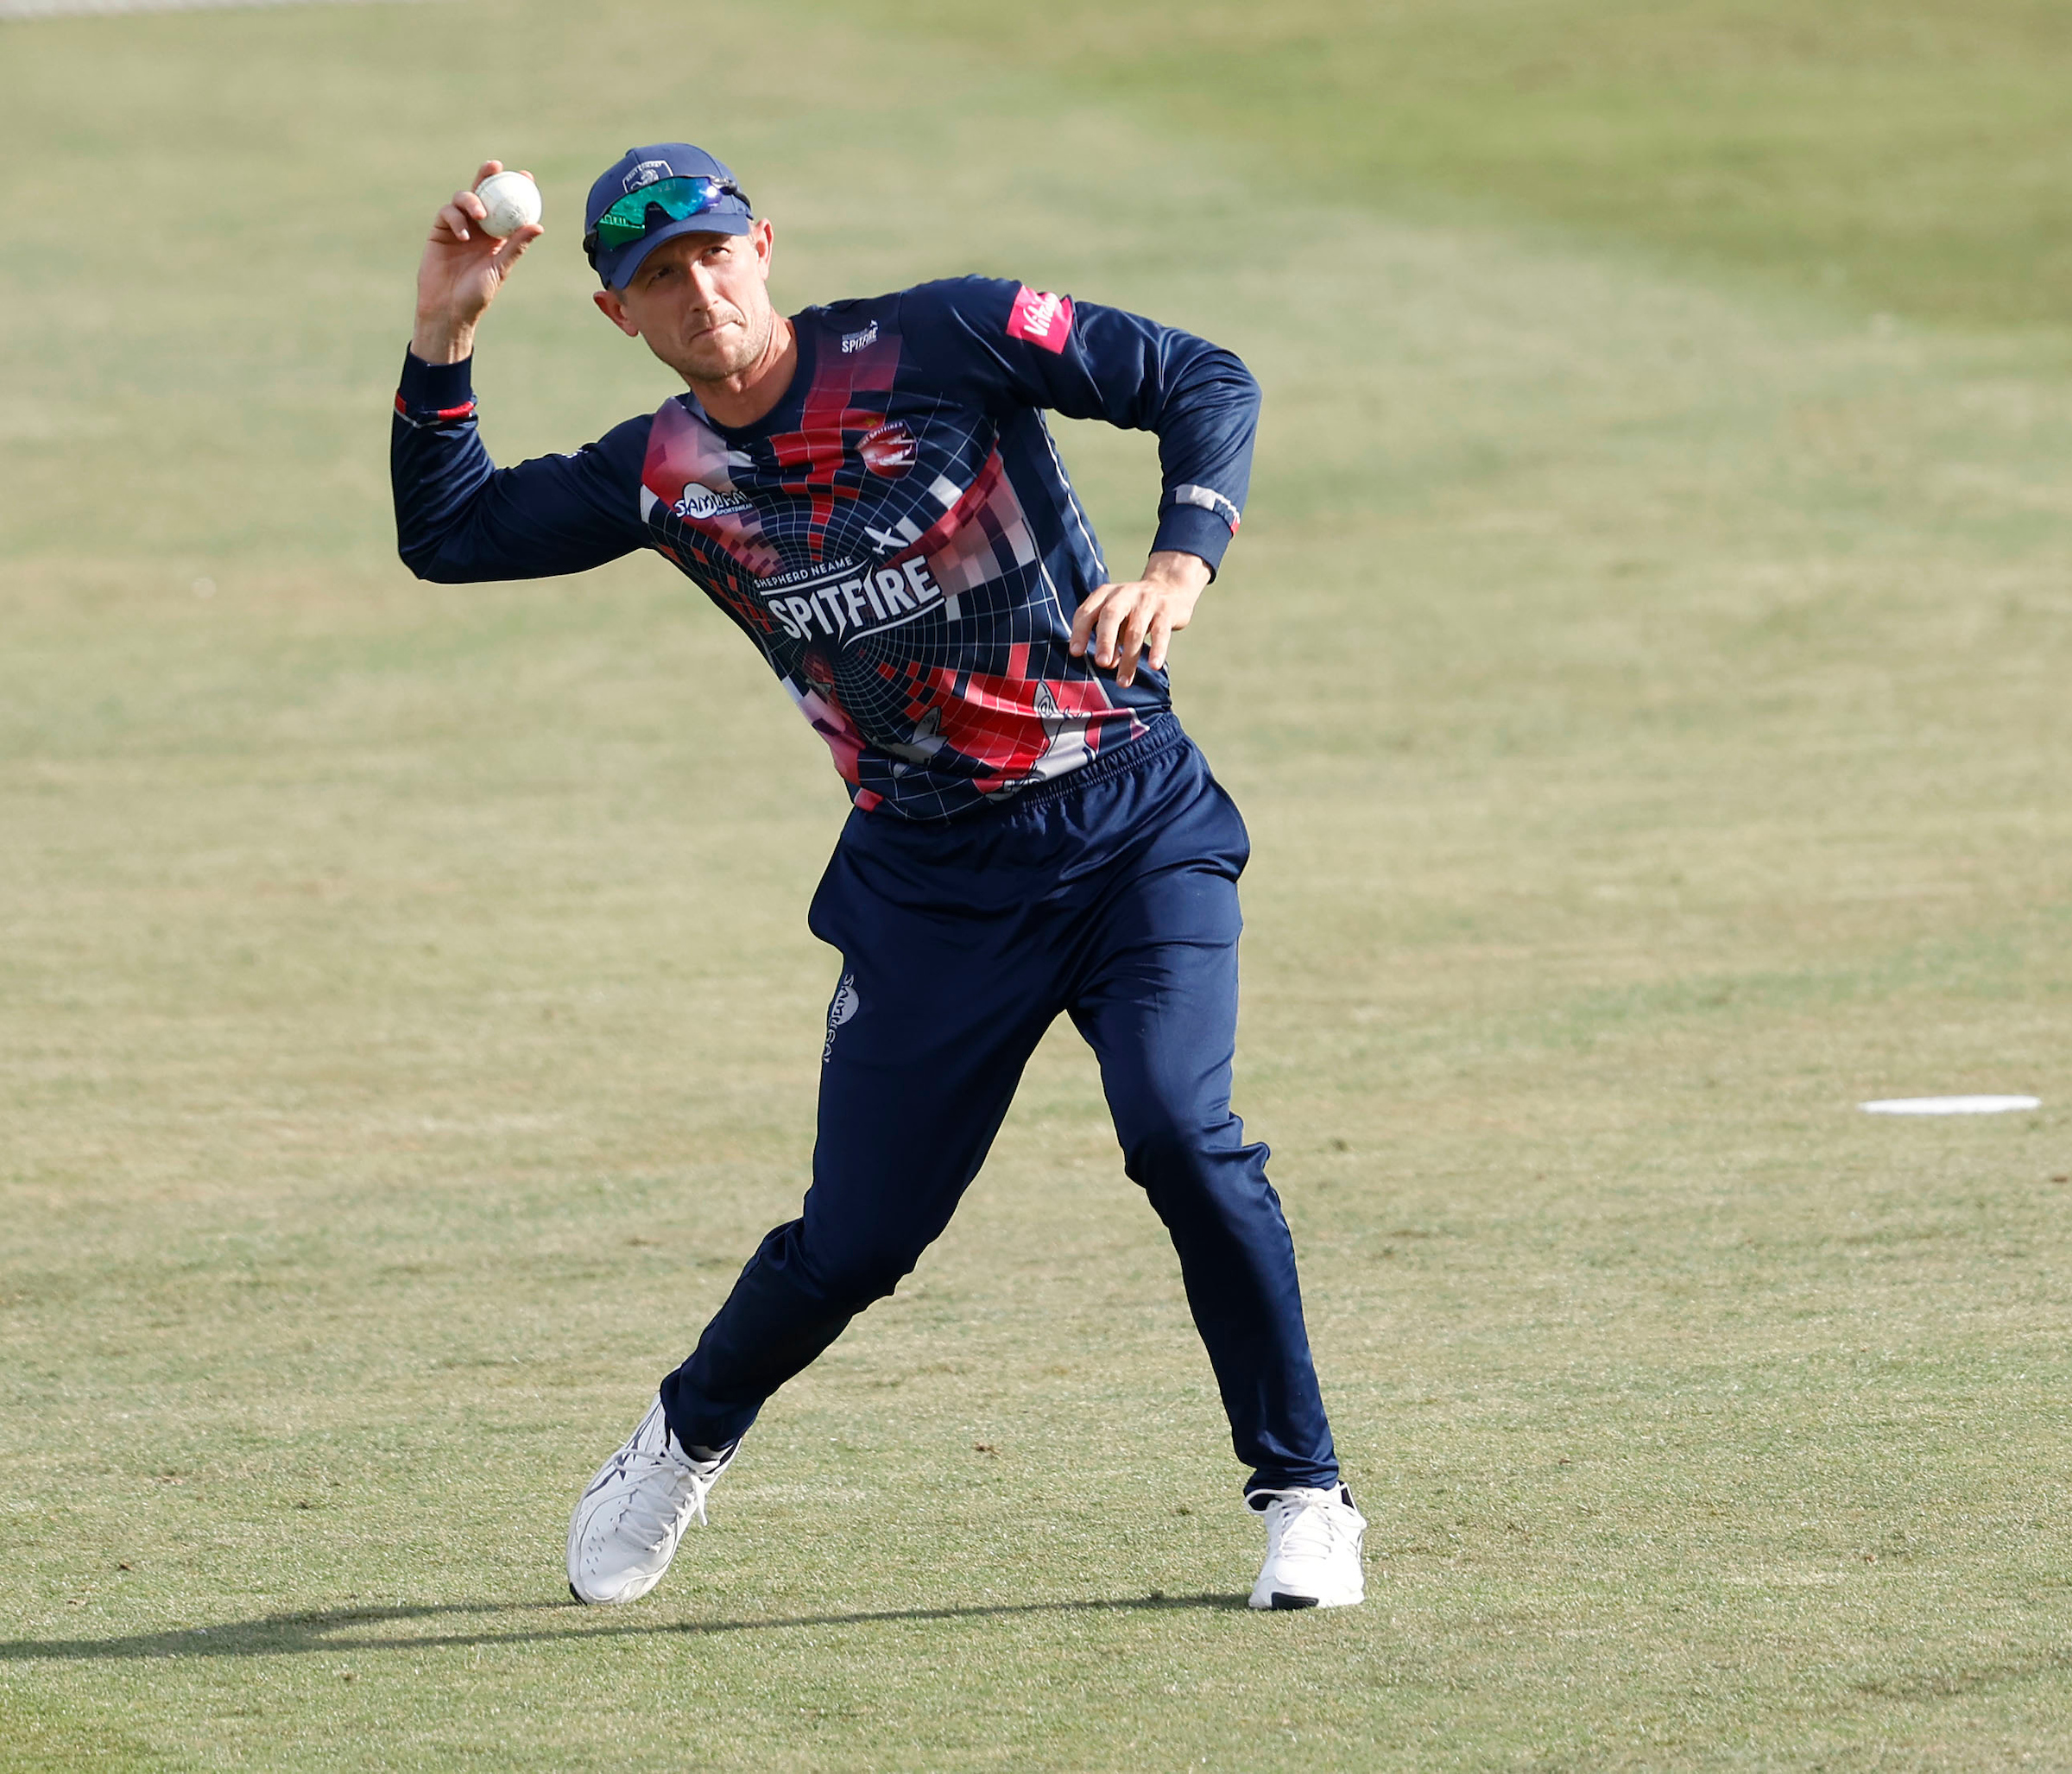 Win a personal chat with Joe Denly